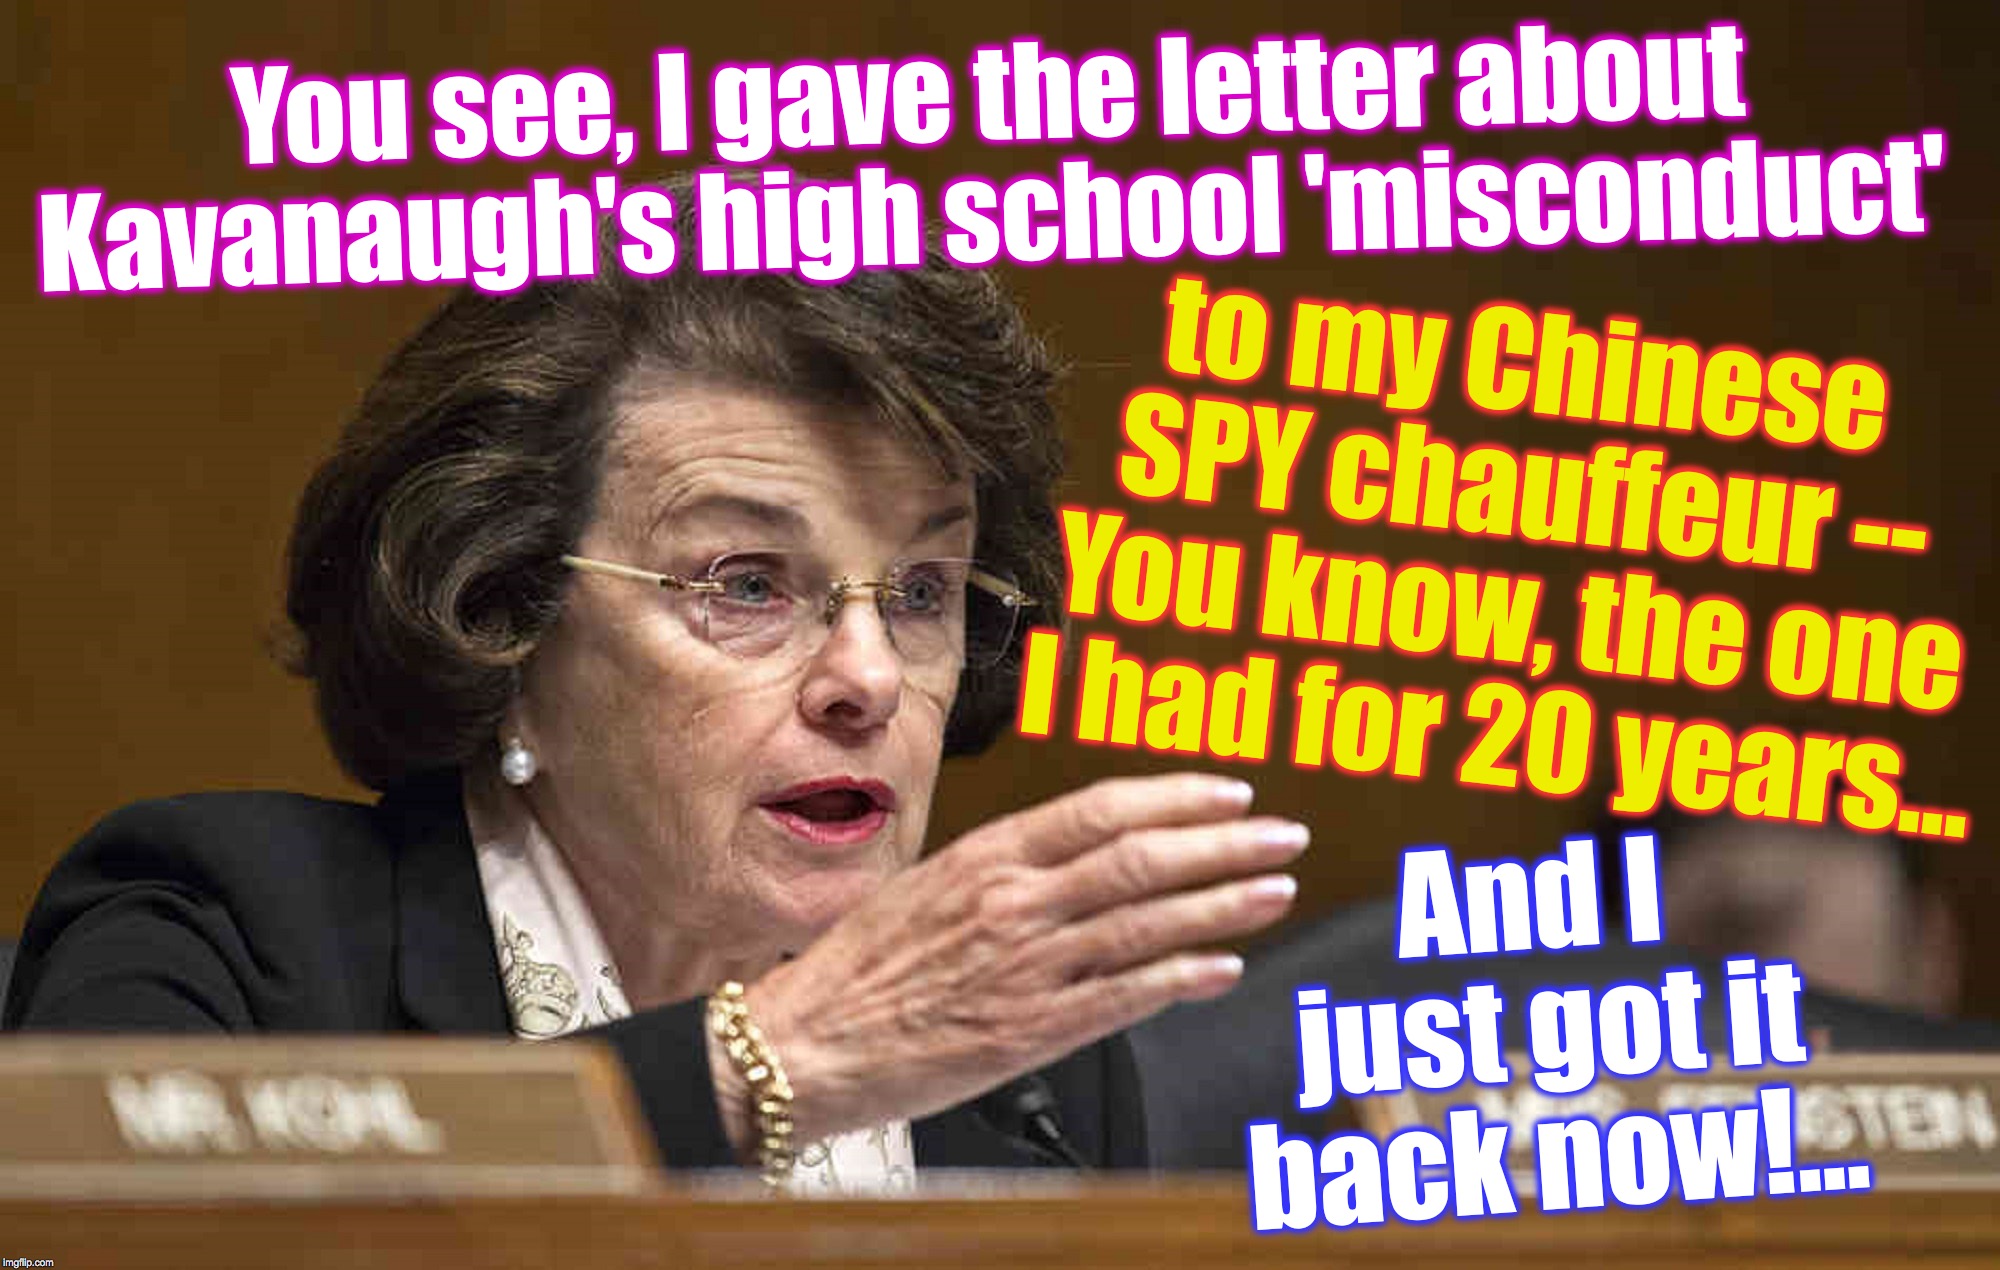 You see, I gave the letter about Kavanaugh's high school 'misconduct'; to my Chinese SPY chauffeur -- You know, the one I had for 20 years... And I just got it back now!... | image tagged in brett kavanaugh | made w/ Imgflip meme maker